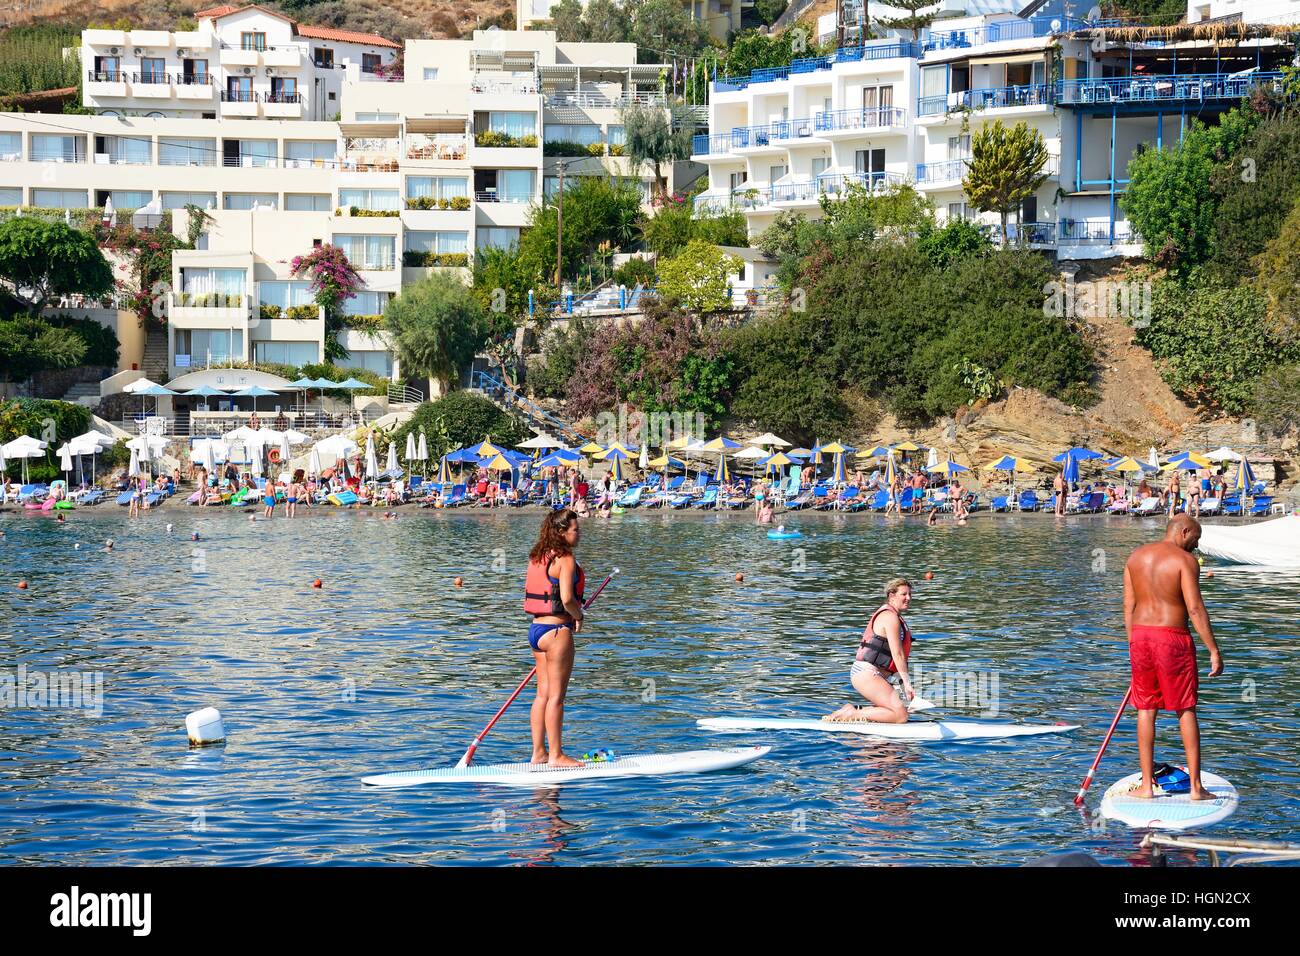 Holidaymakers on paddle boards with tourists relaxing on the beach to the rear, Bali, Crete, Greece, Europe. Stock Photo